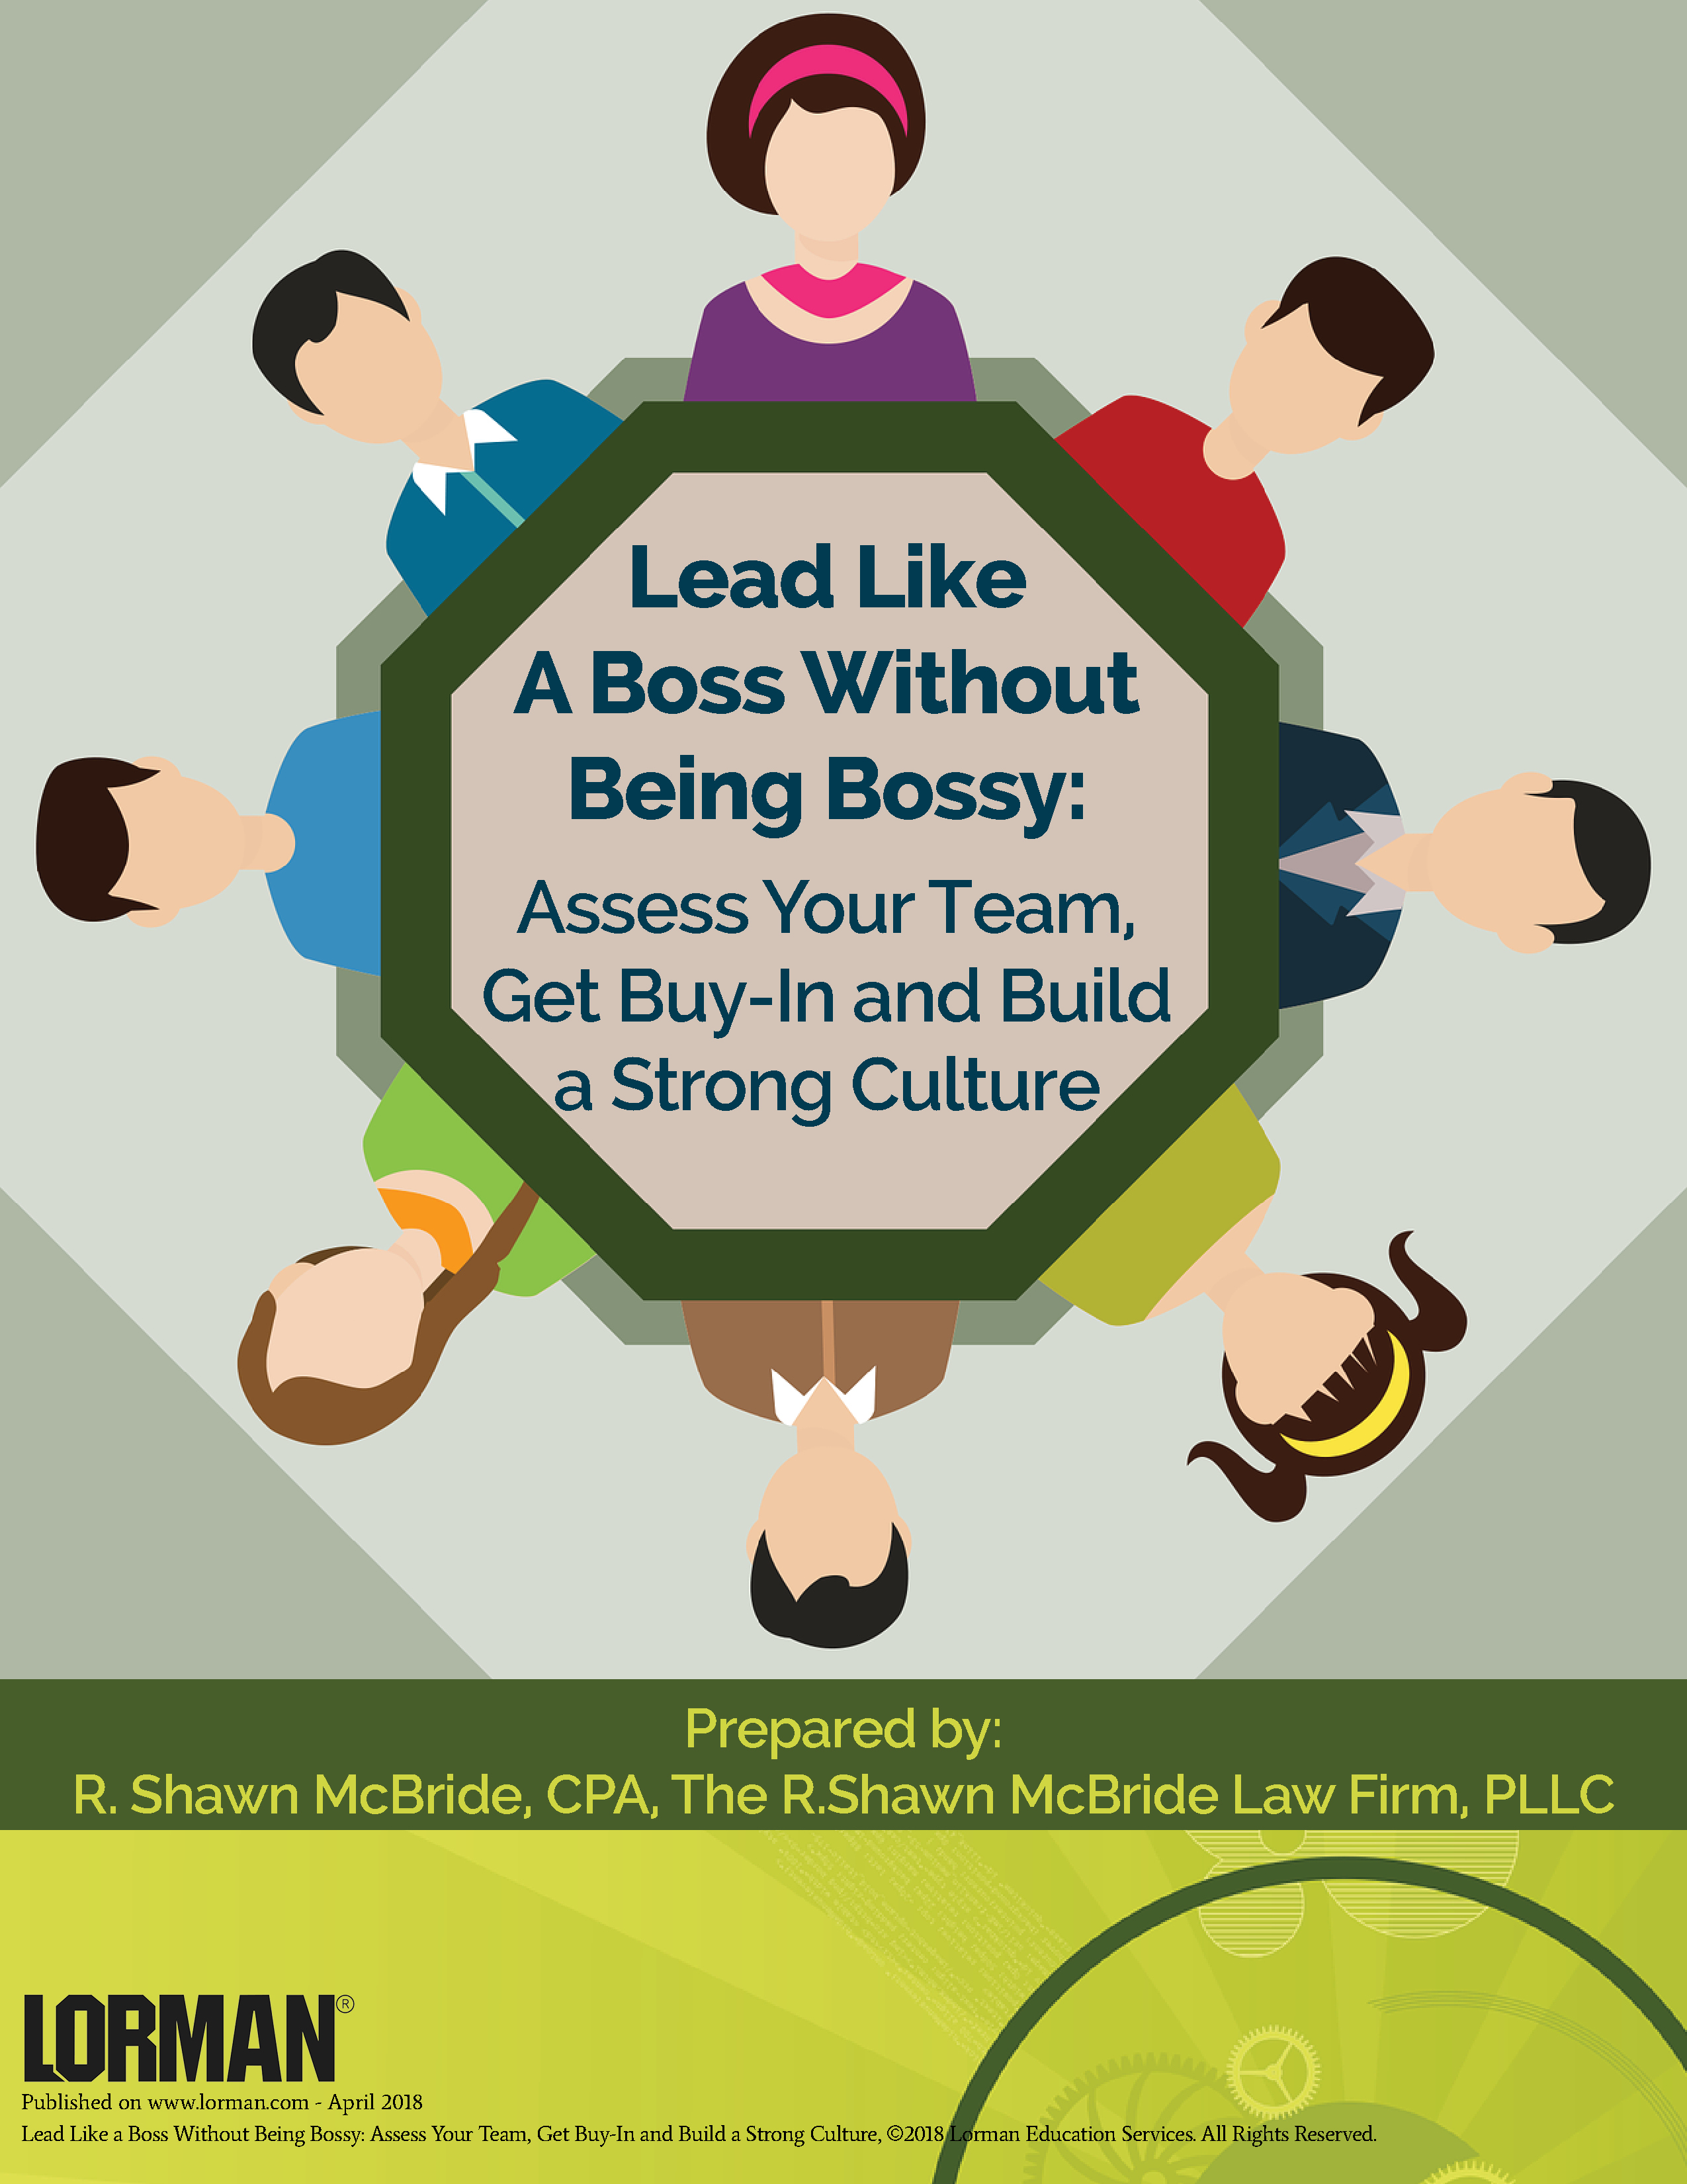 Lead Like A Boss Without Being Bossy: Assess Your Team, Get Buy-In and Build a Strong Culture